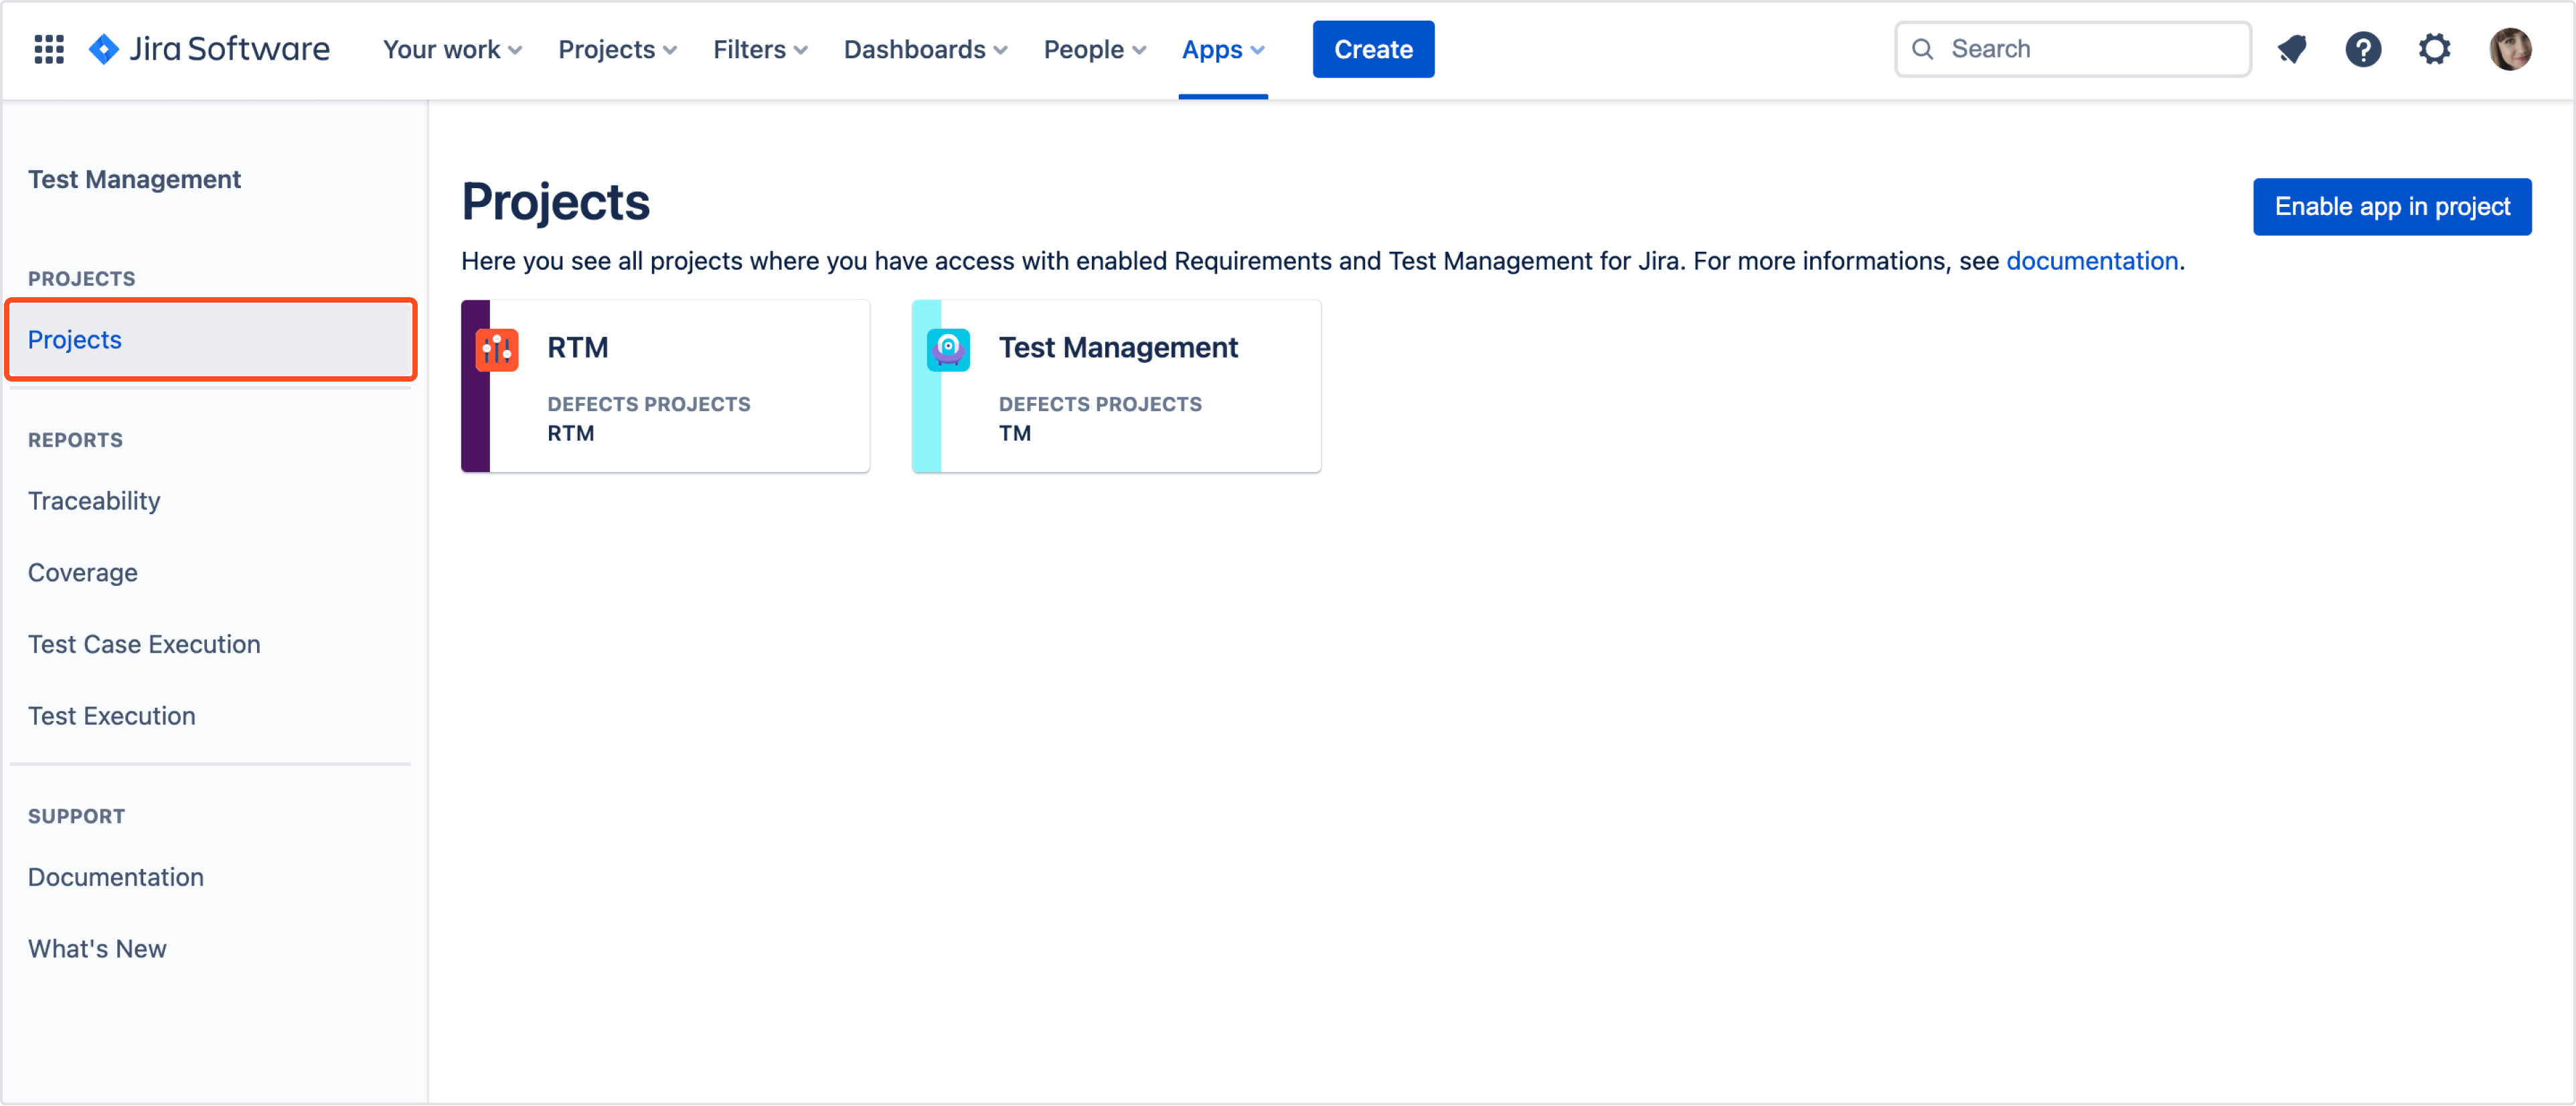 Now you can start your adventure with Requirements and Test Management for Jira app